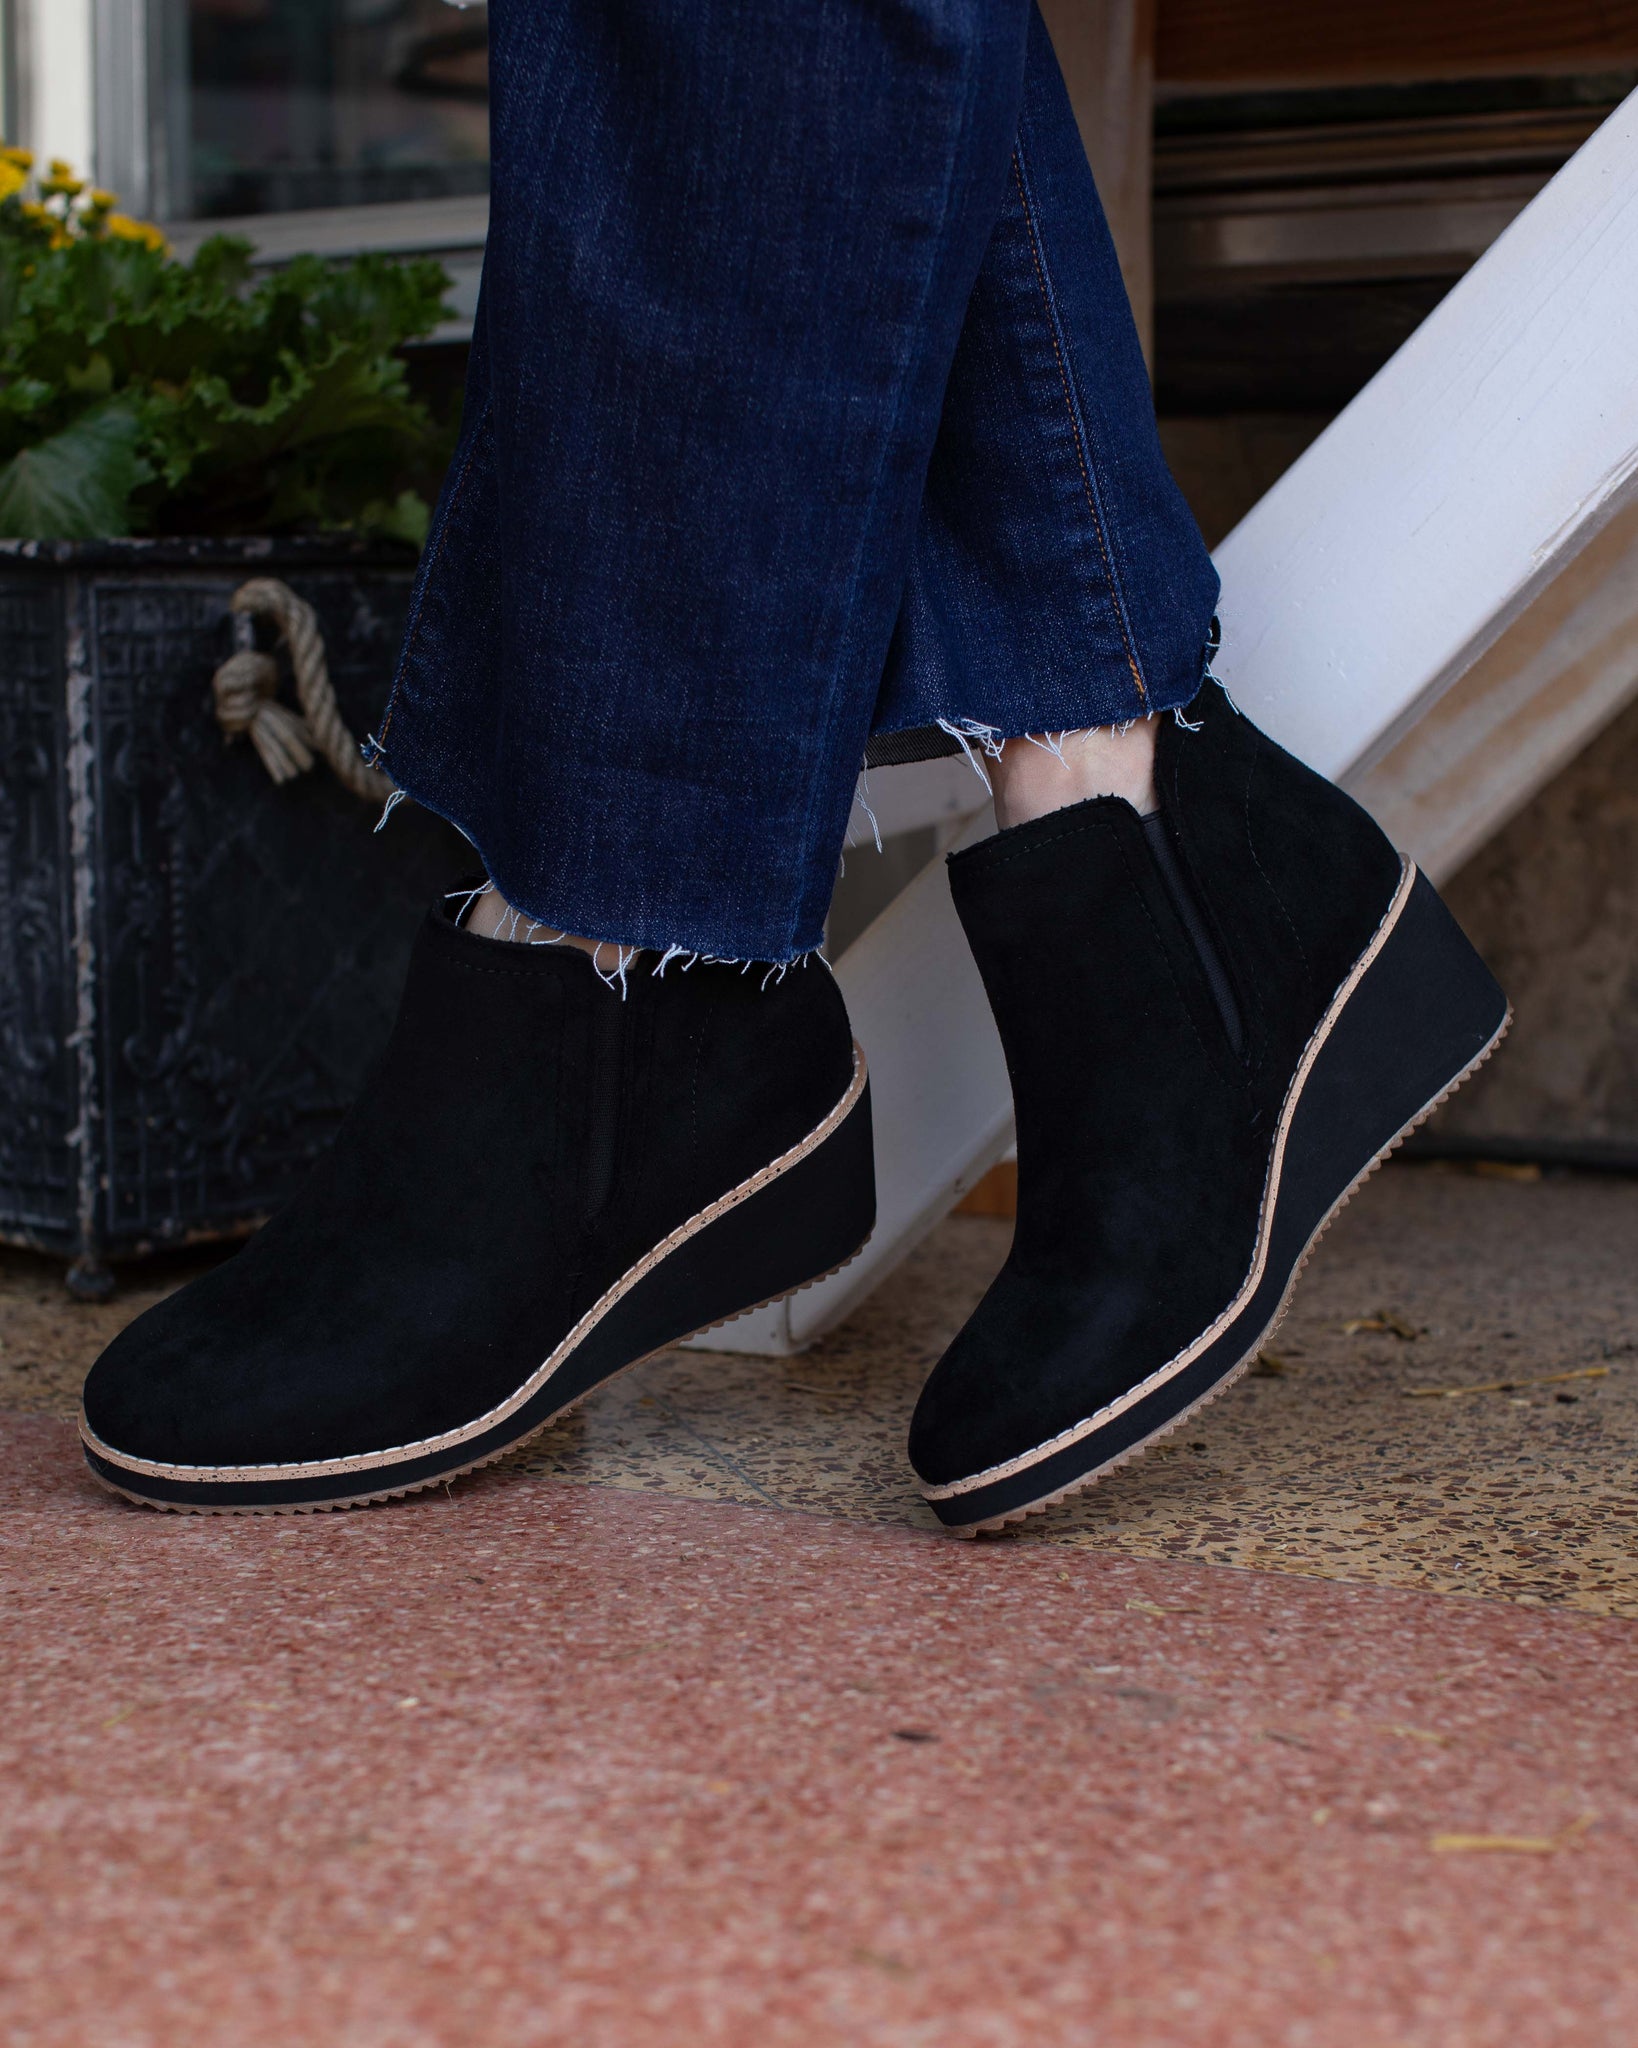 BLACK FAUX SUEDE WEDGE BOOTIE BY CORKYS